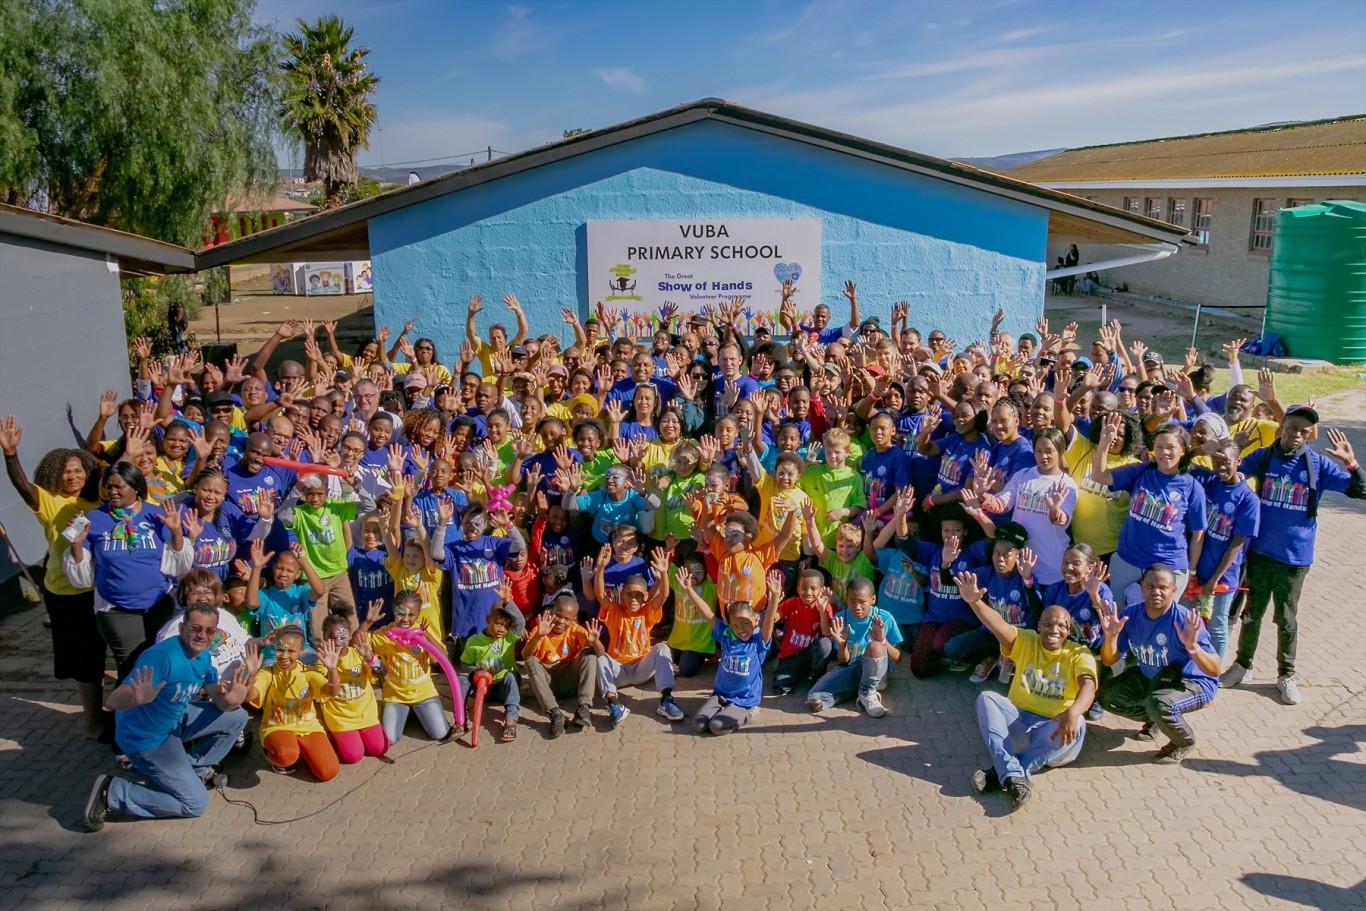 Volkswagen employees continue to live Nelson Mandela’s legacy